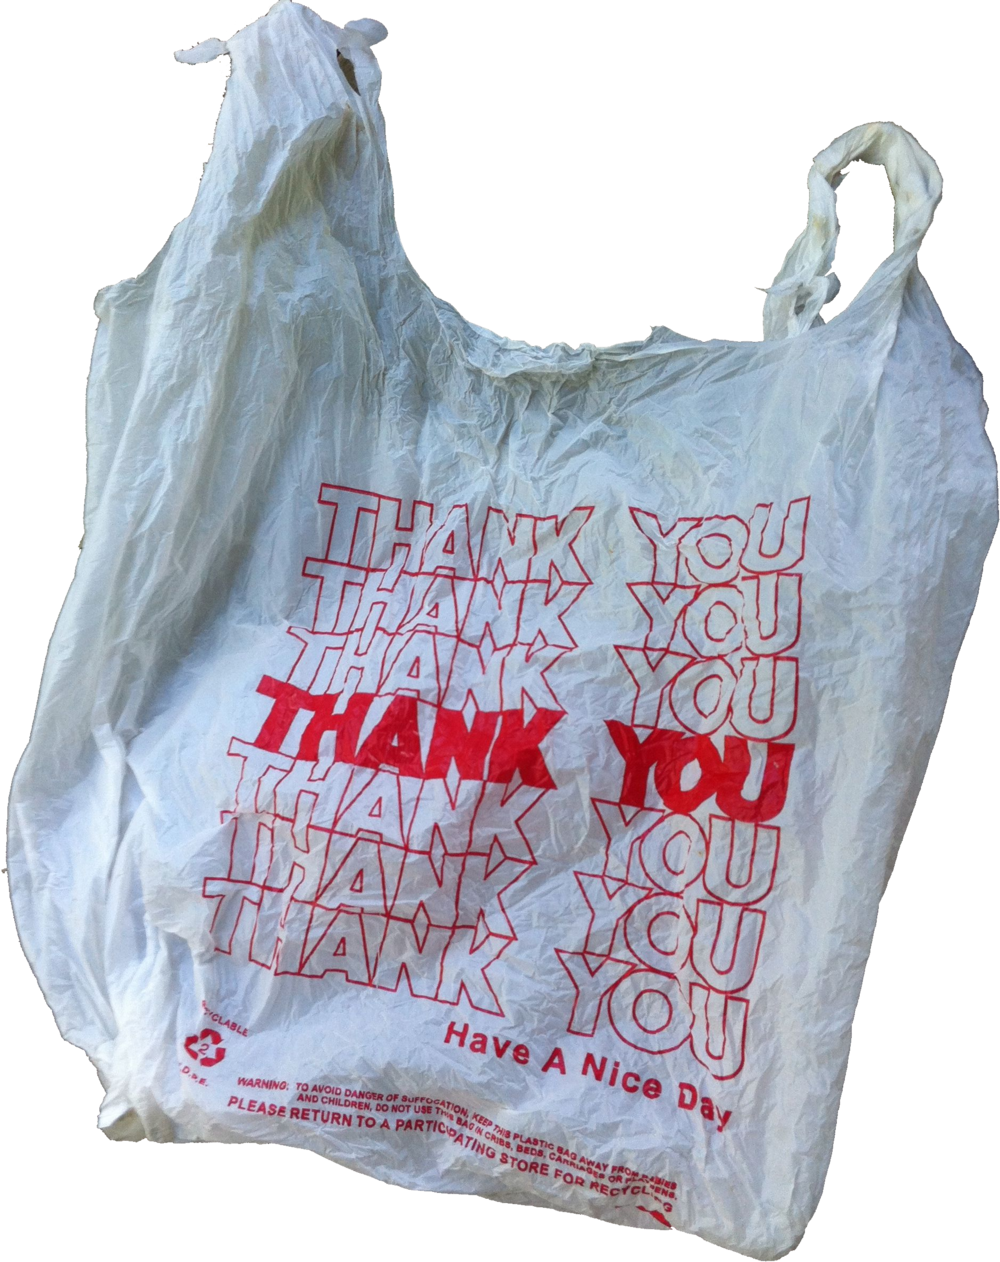 Thank You Plastic Bag Red Text PNG